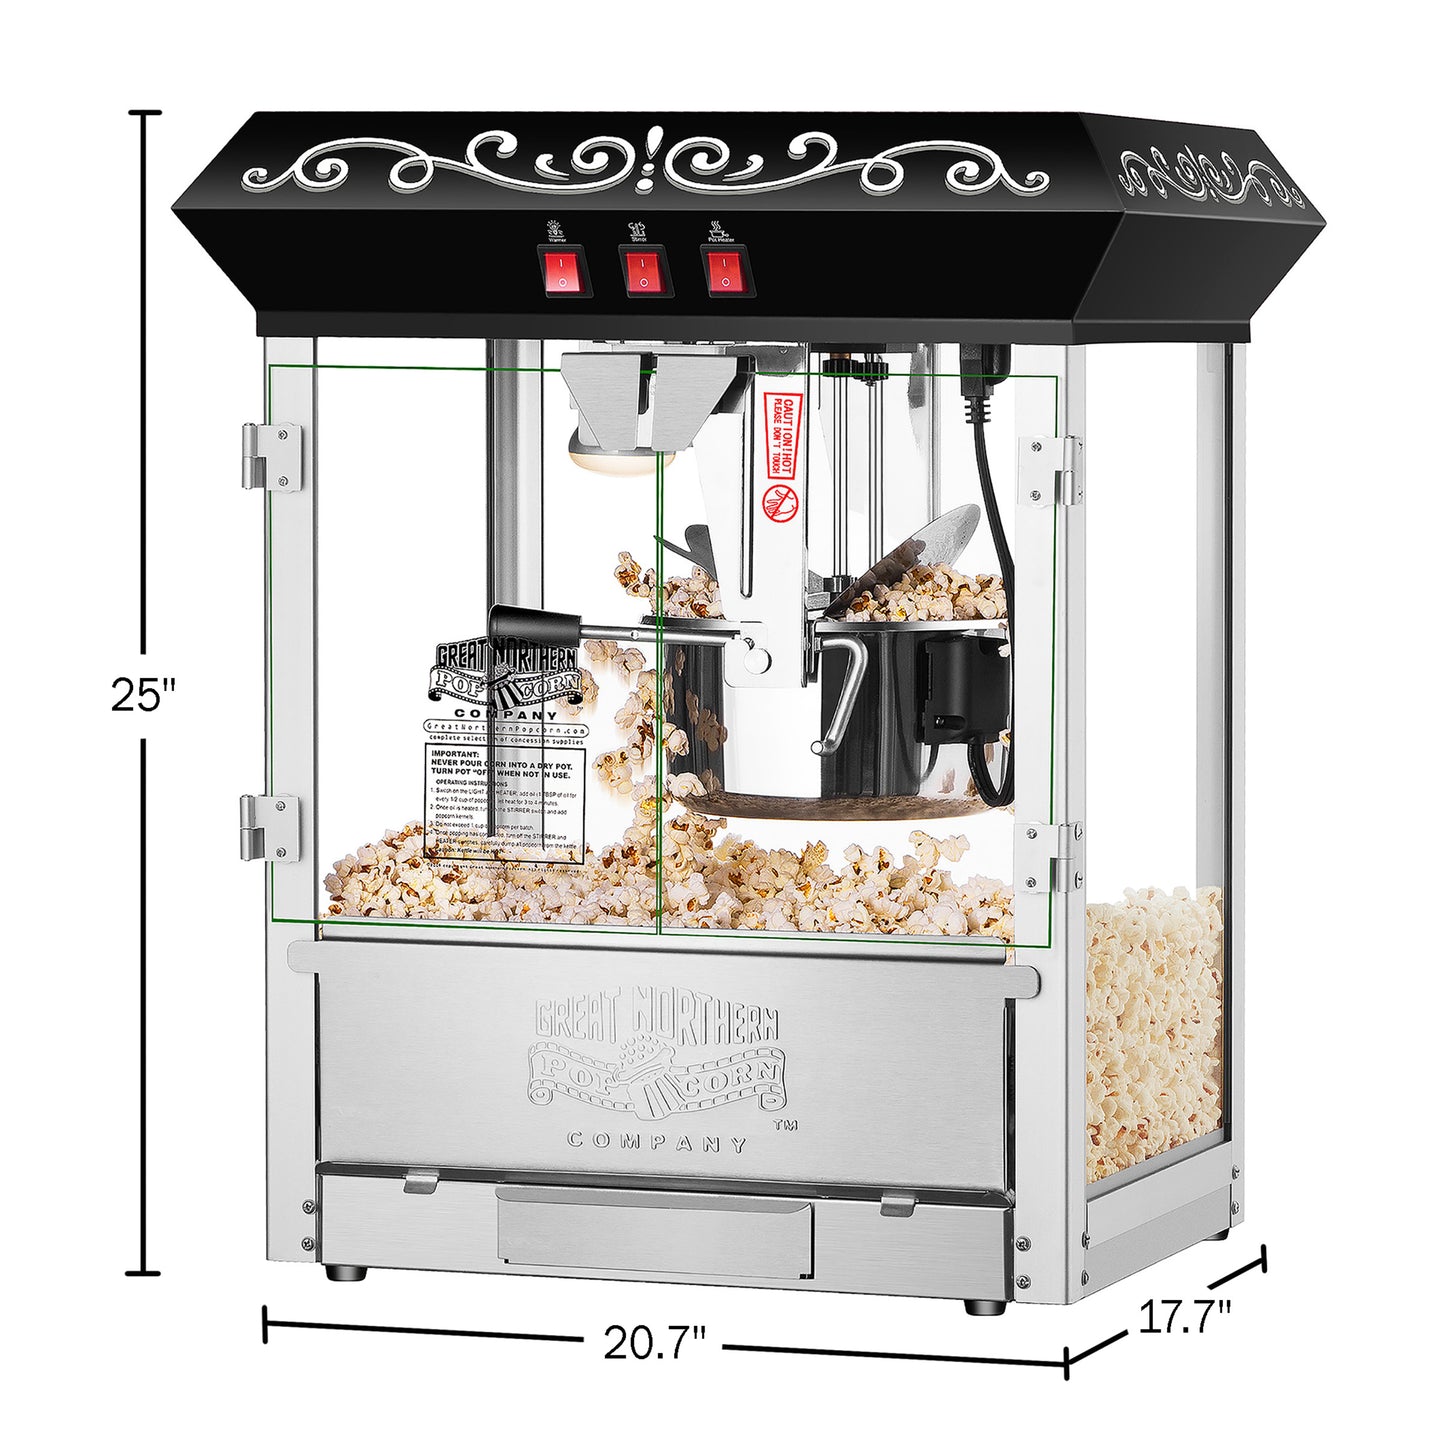 Perfect Popper Popcorn Machine - 10oz Stainless-Steel Kettle, Reject Kernel  Tray, Warming Light, and Accessories by Great Northern Popcorn (Black)